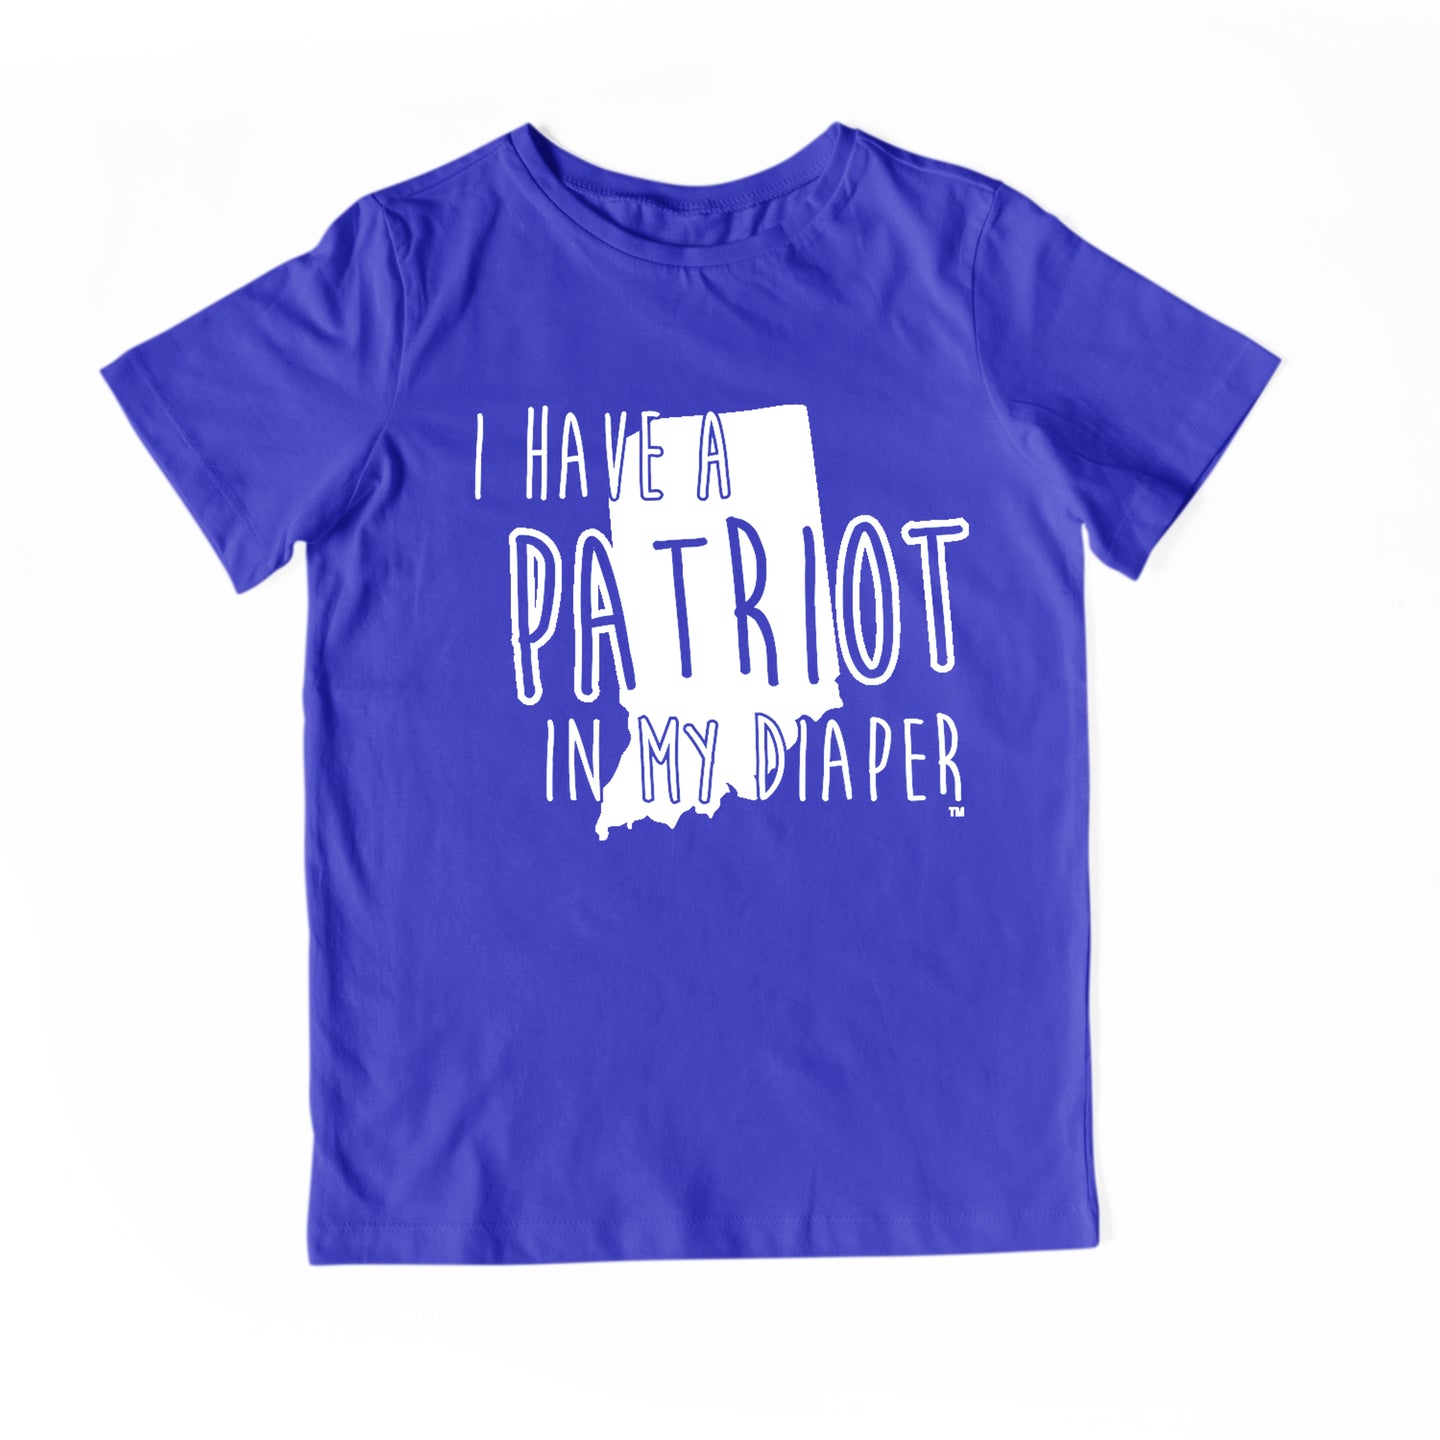 I HAVE A PATRIOT IN MY DIAPER Child Tee